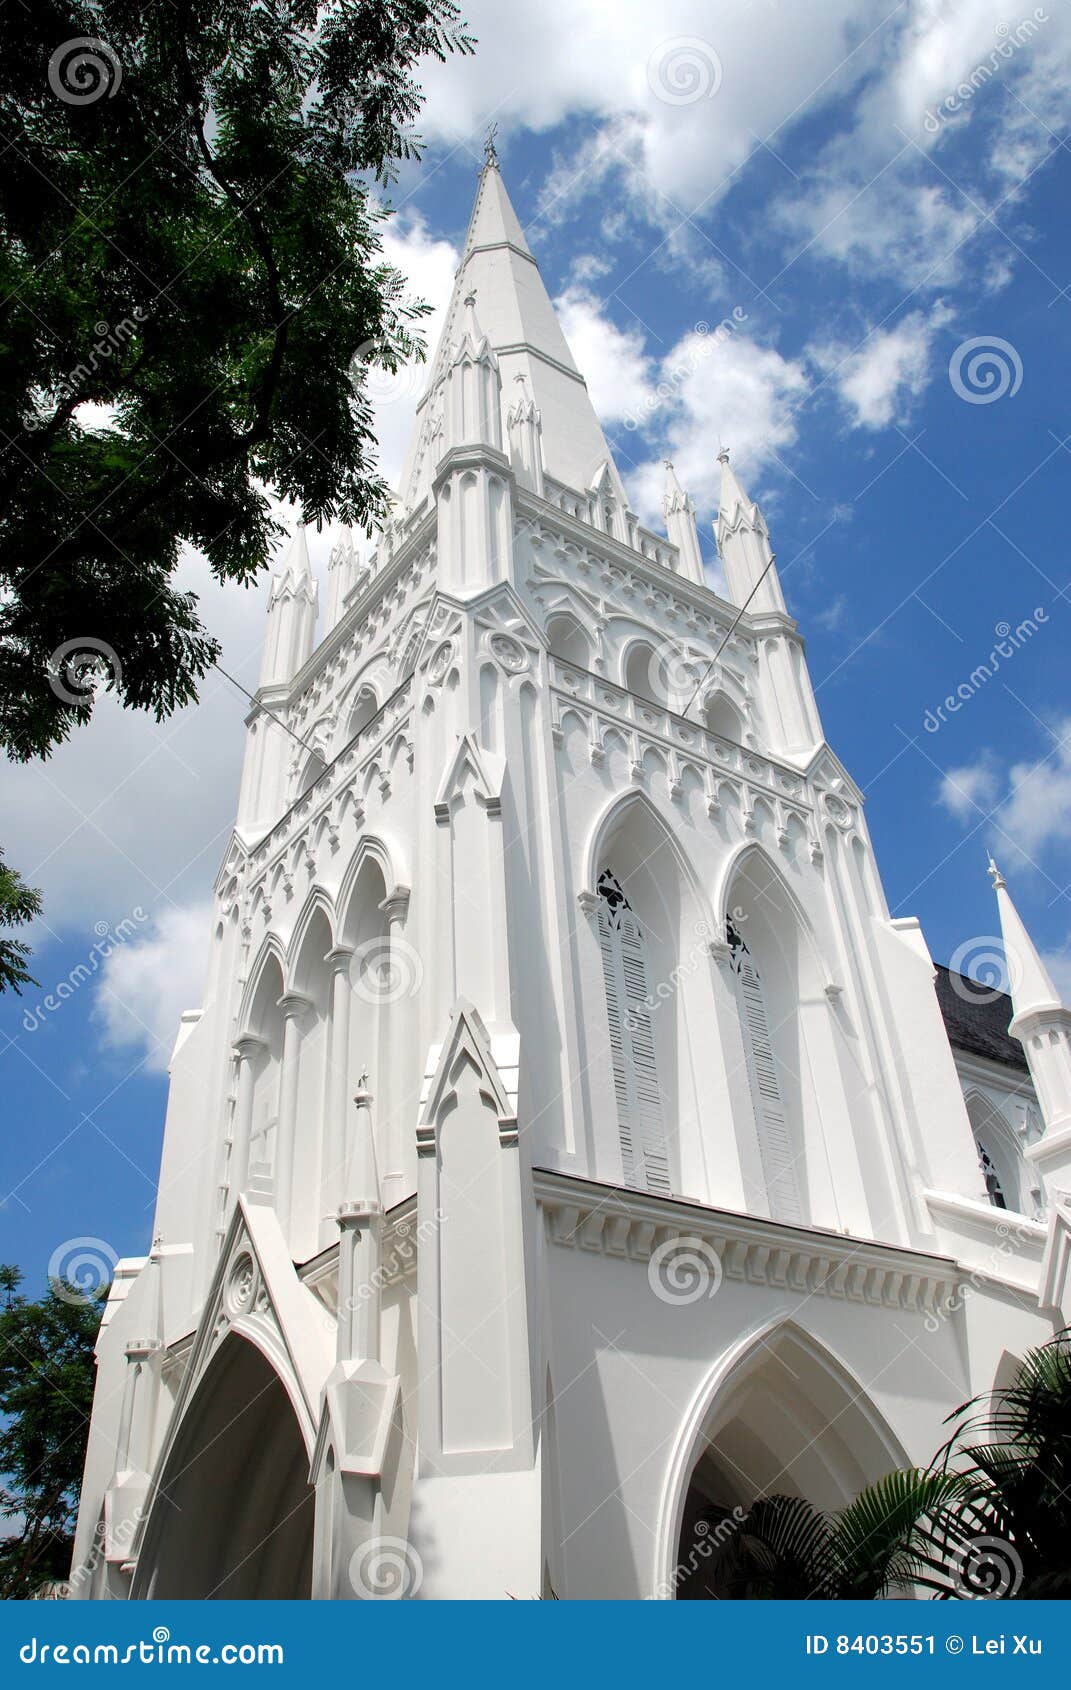 singapore: neo-gothic st. andrew's cathedral